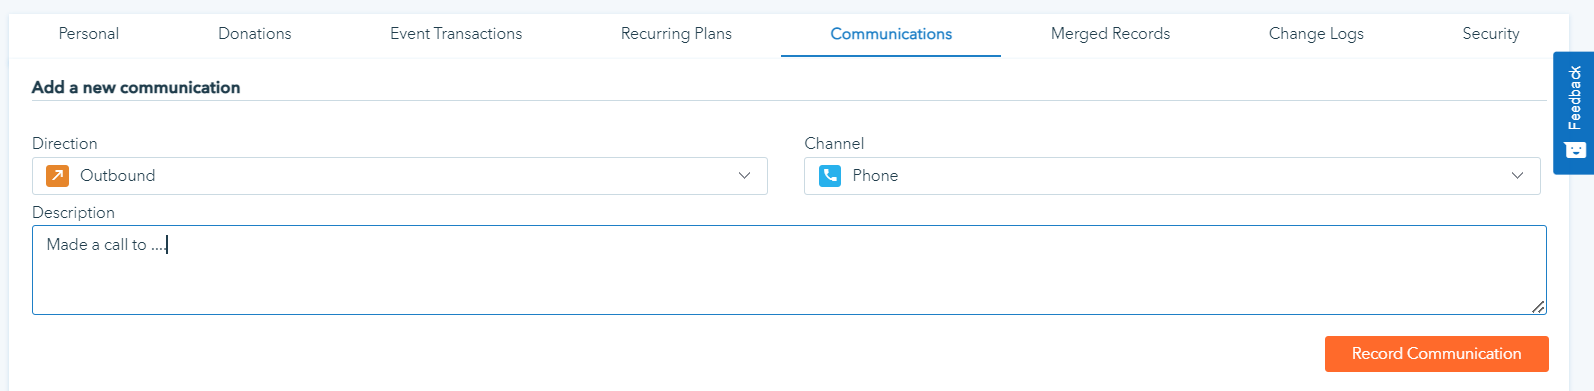 adding communication notes to donor profiles on donorbox - phone a thon